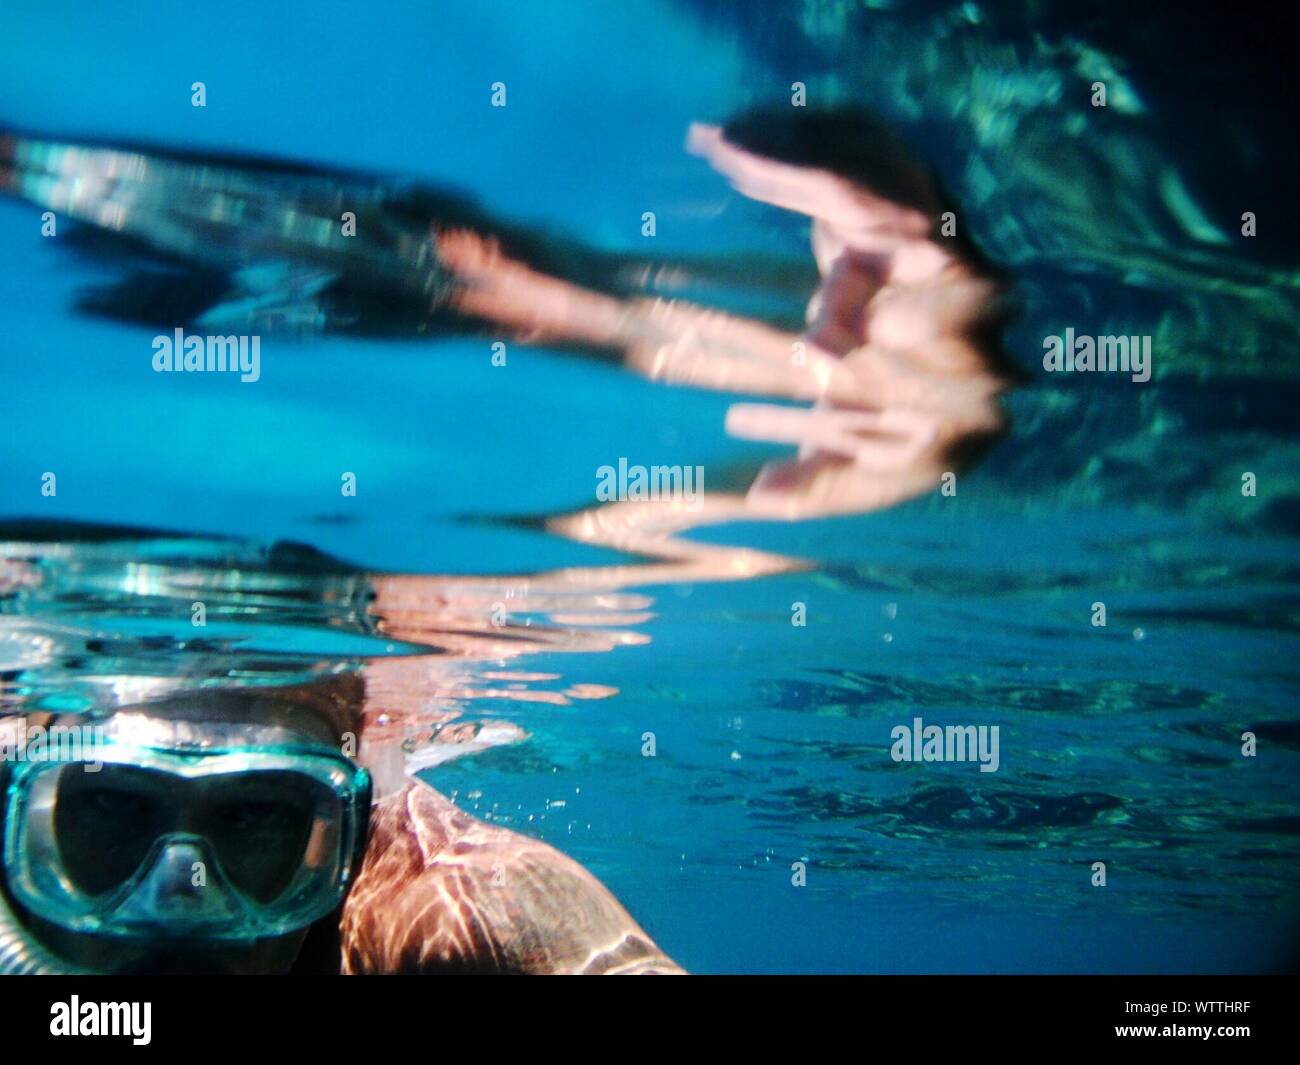 Underwater View Of Person Snorkelling Stock Photo